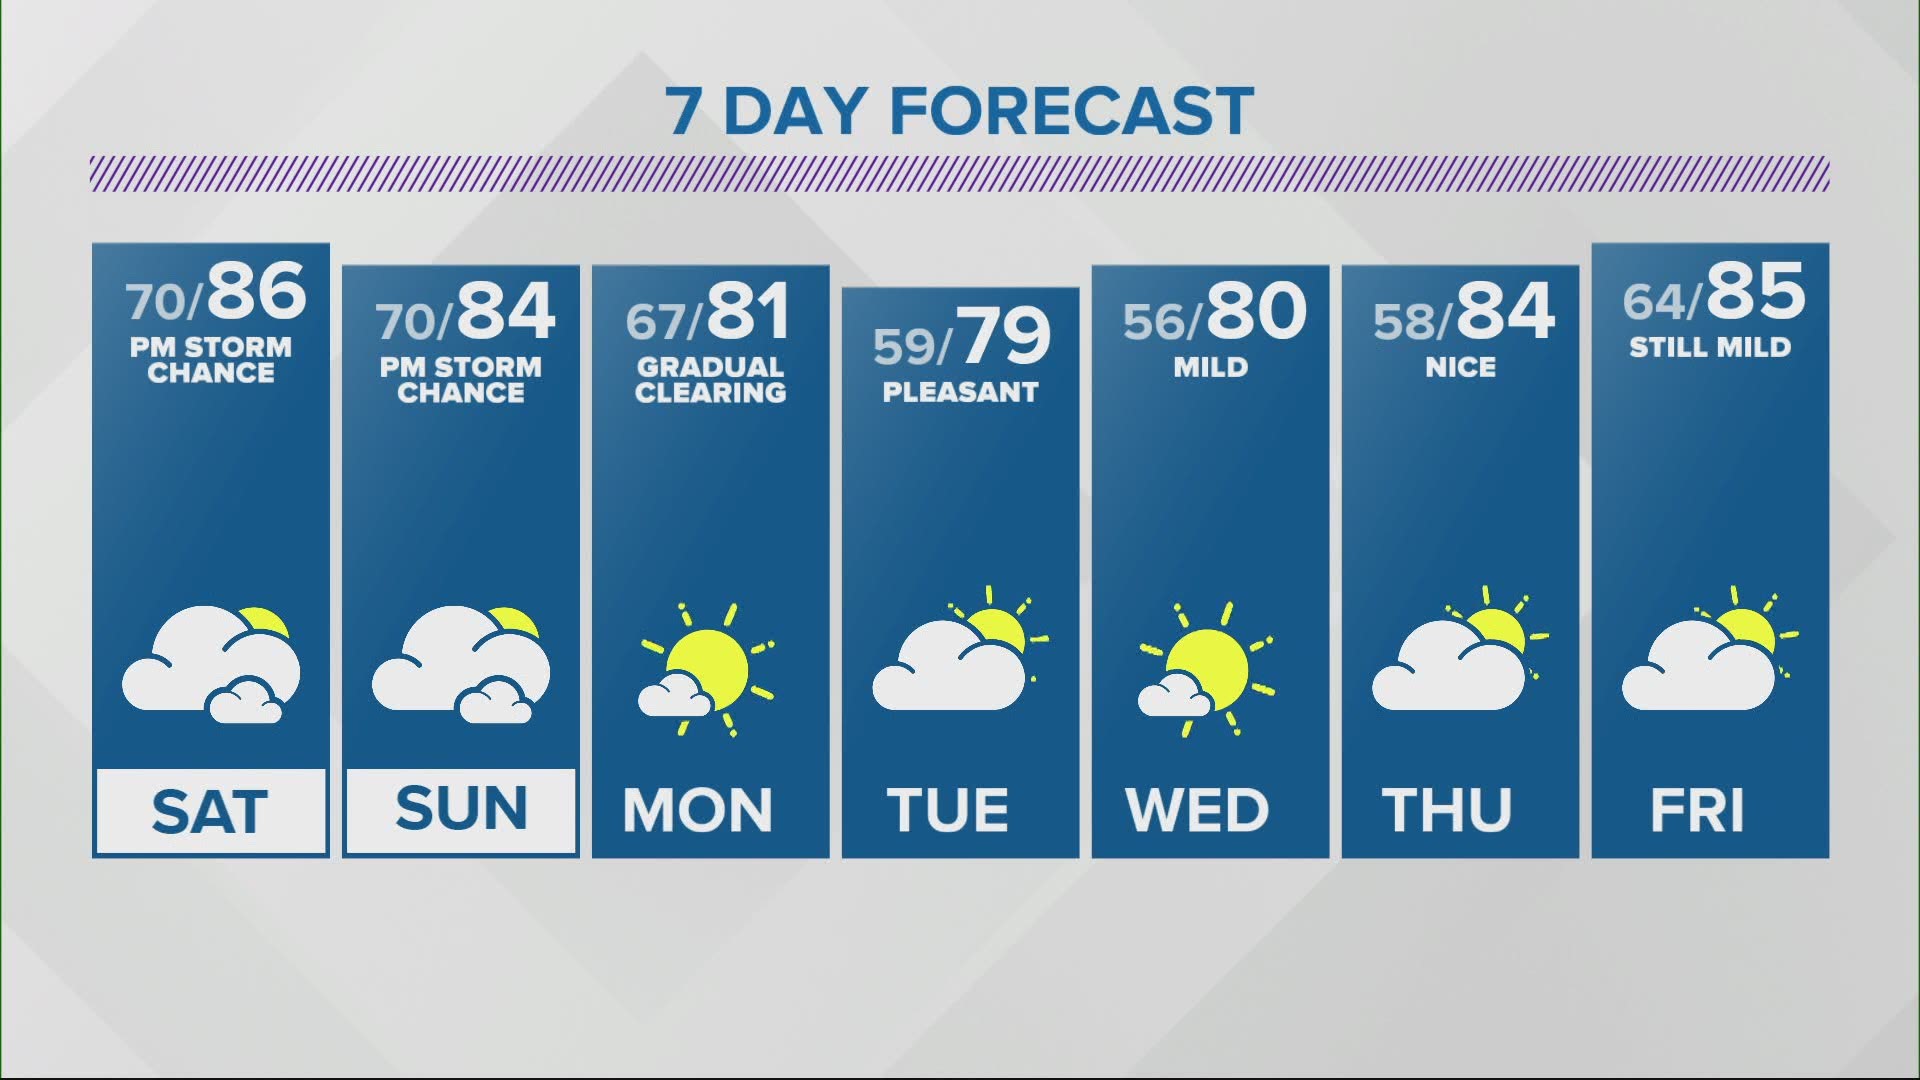 It will be a warm, muggy weekend with a chance of a pop-up shower or two.